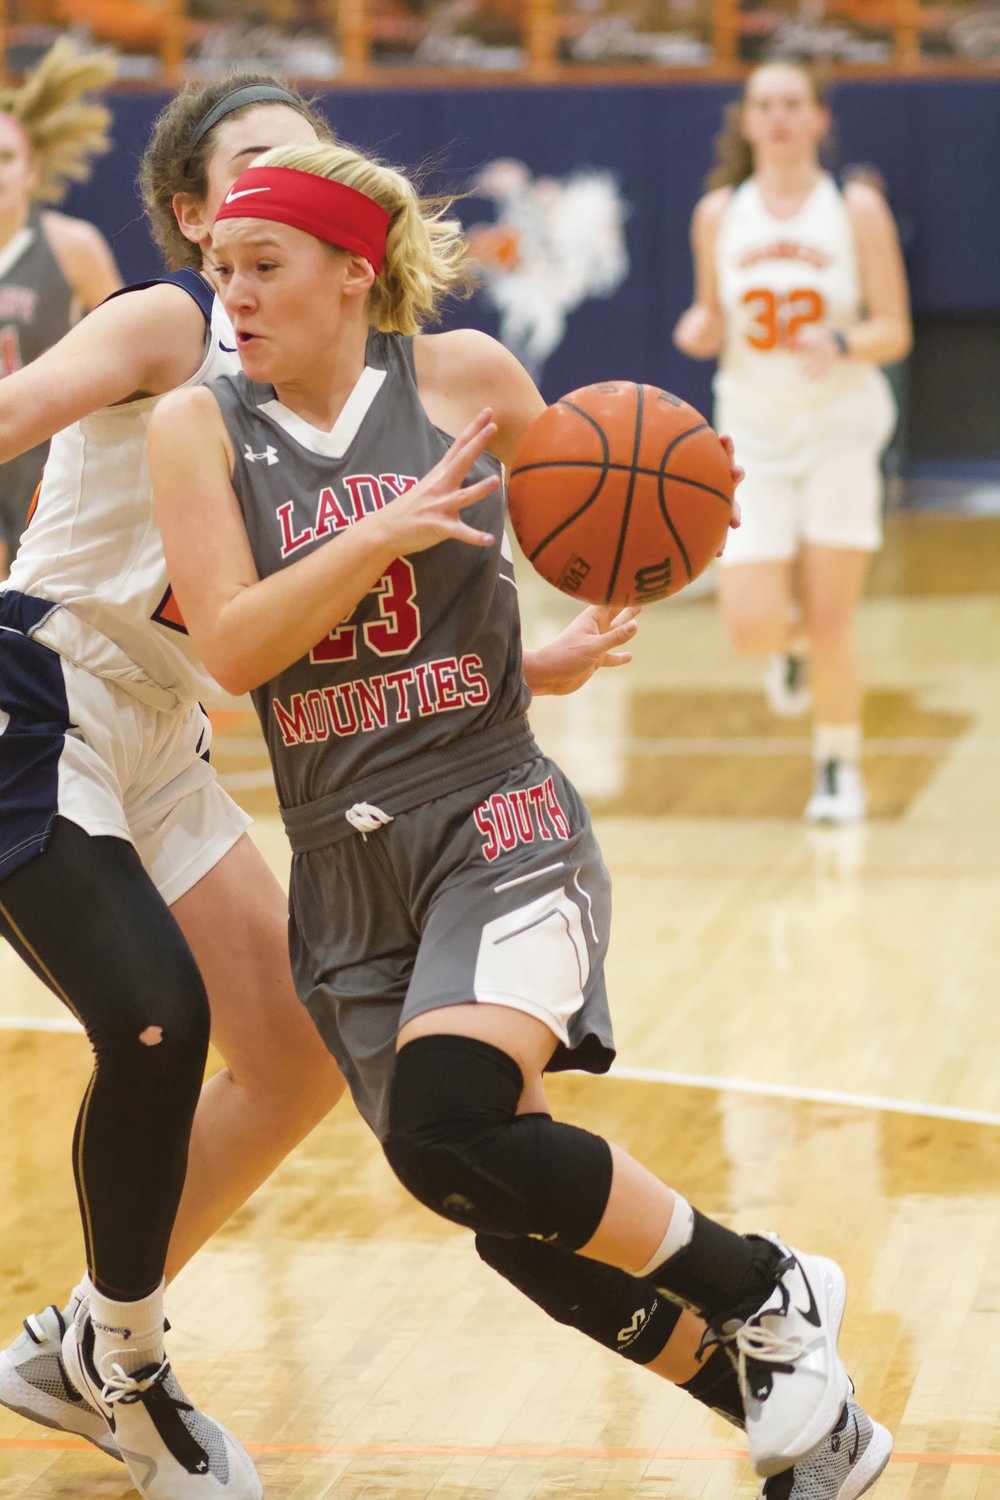 Southmont's Addison Charles looks to score in the Mounties' 55-29 win over the Chargers on Thursday.